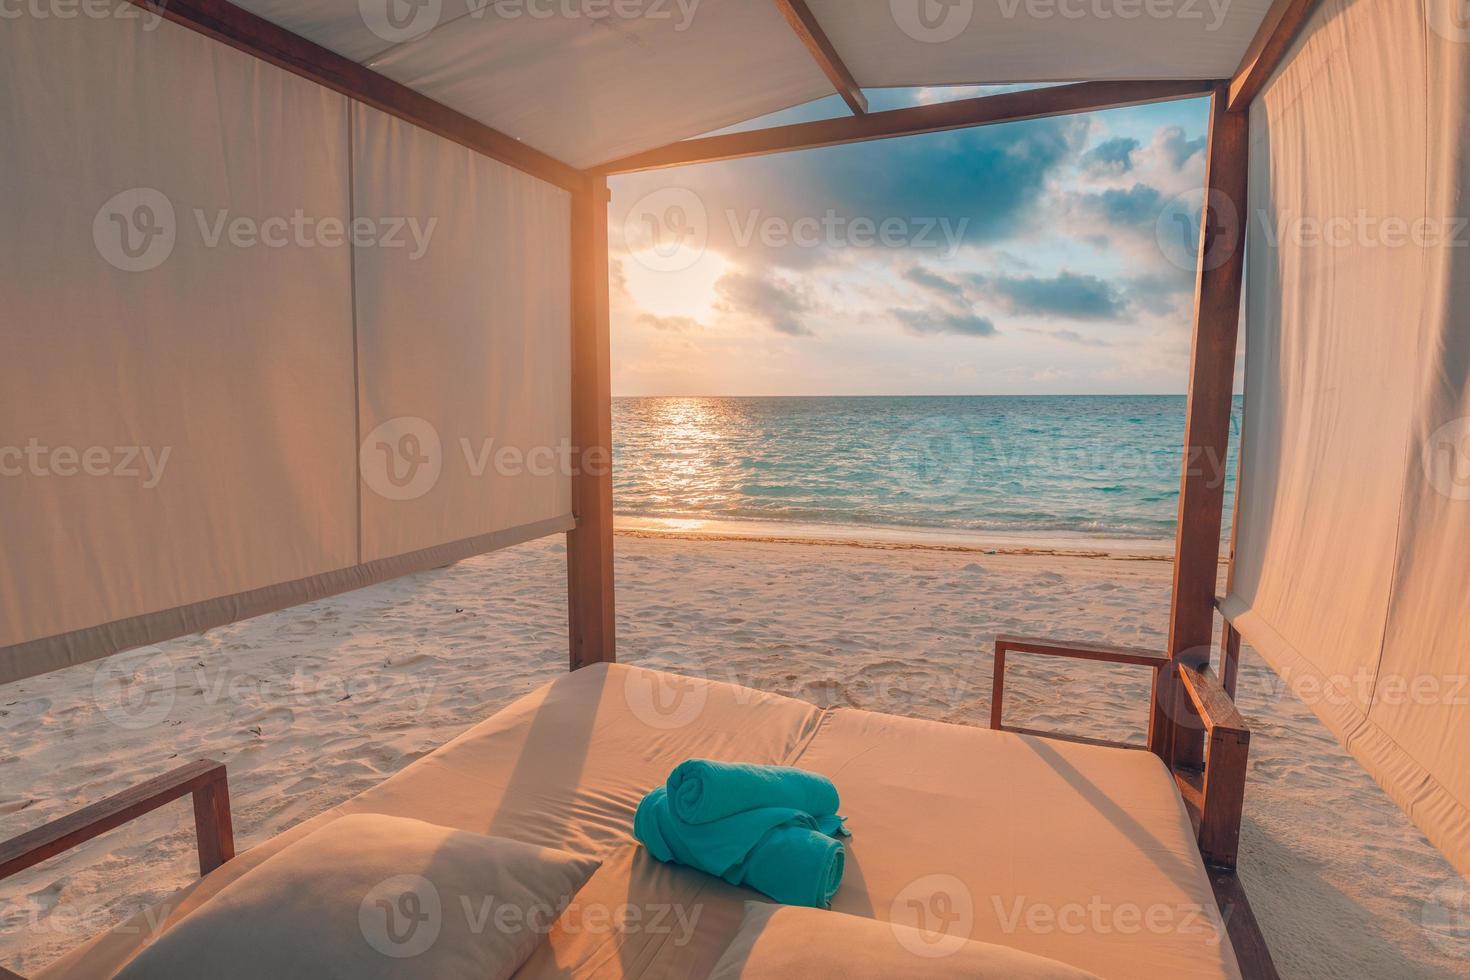 Amazing beach canopy with summer vacation mood. Sunset colors, sea sand sky beach concept with endless sea view. Beautiful tropical landscape, luxury resort or hotel background as travel destination photo